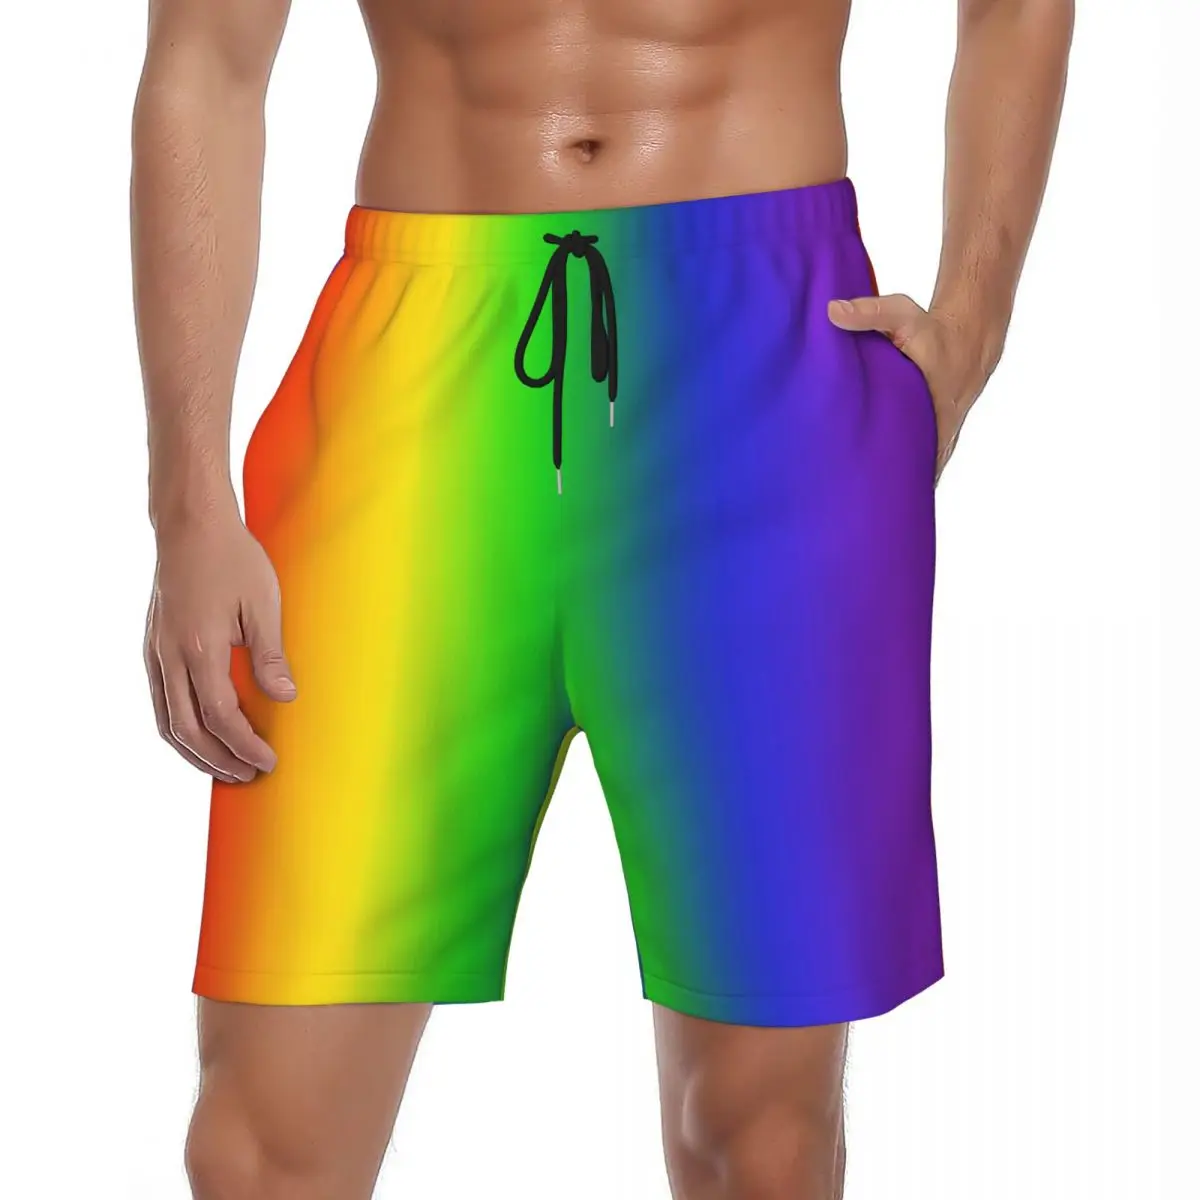 

Man Board Shorts Rainbow Ombre Vintage Swimming Trunks Gradient Quick Dry Sports Fitness Hot Sale Plus Size Beach Short Pants